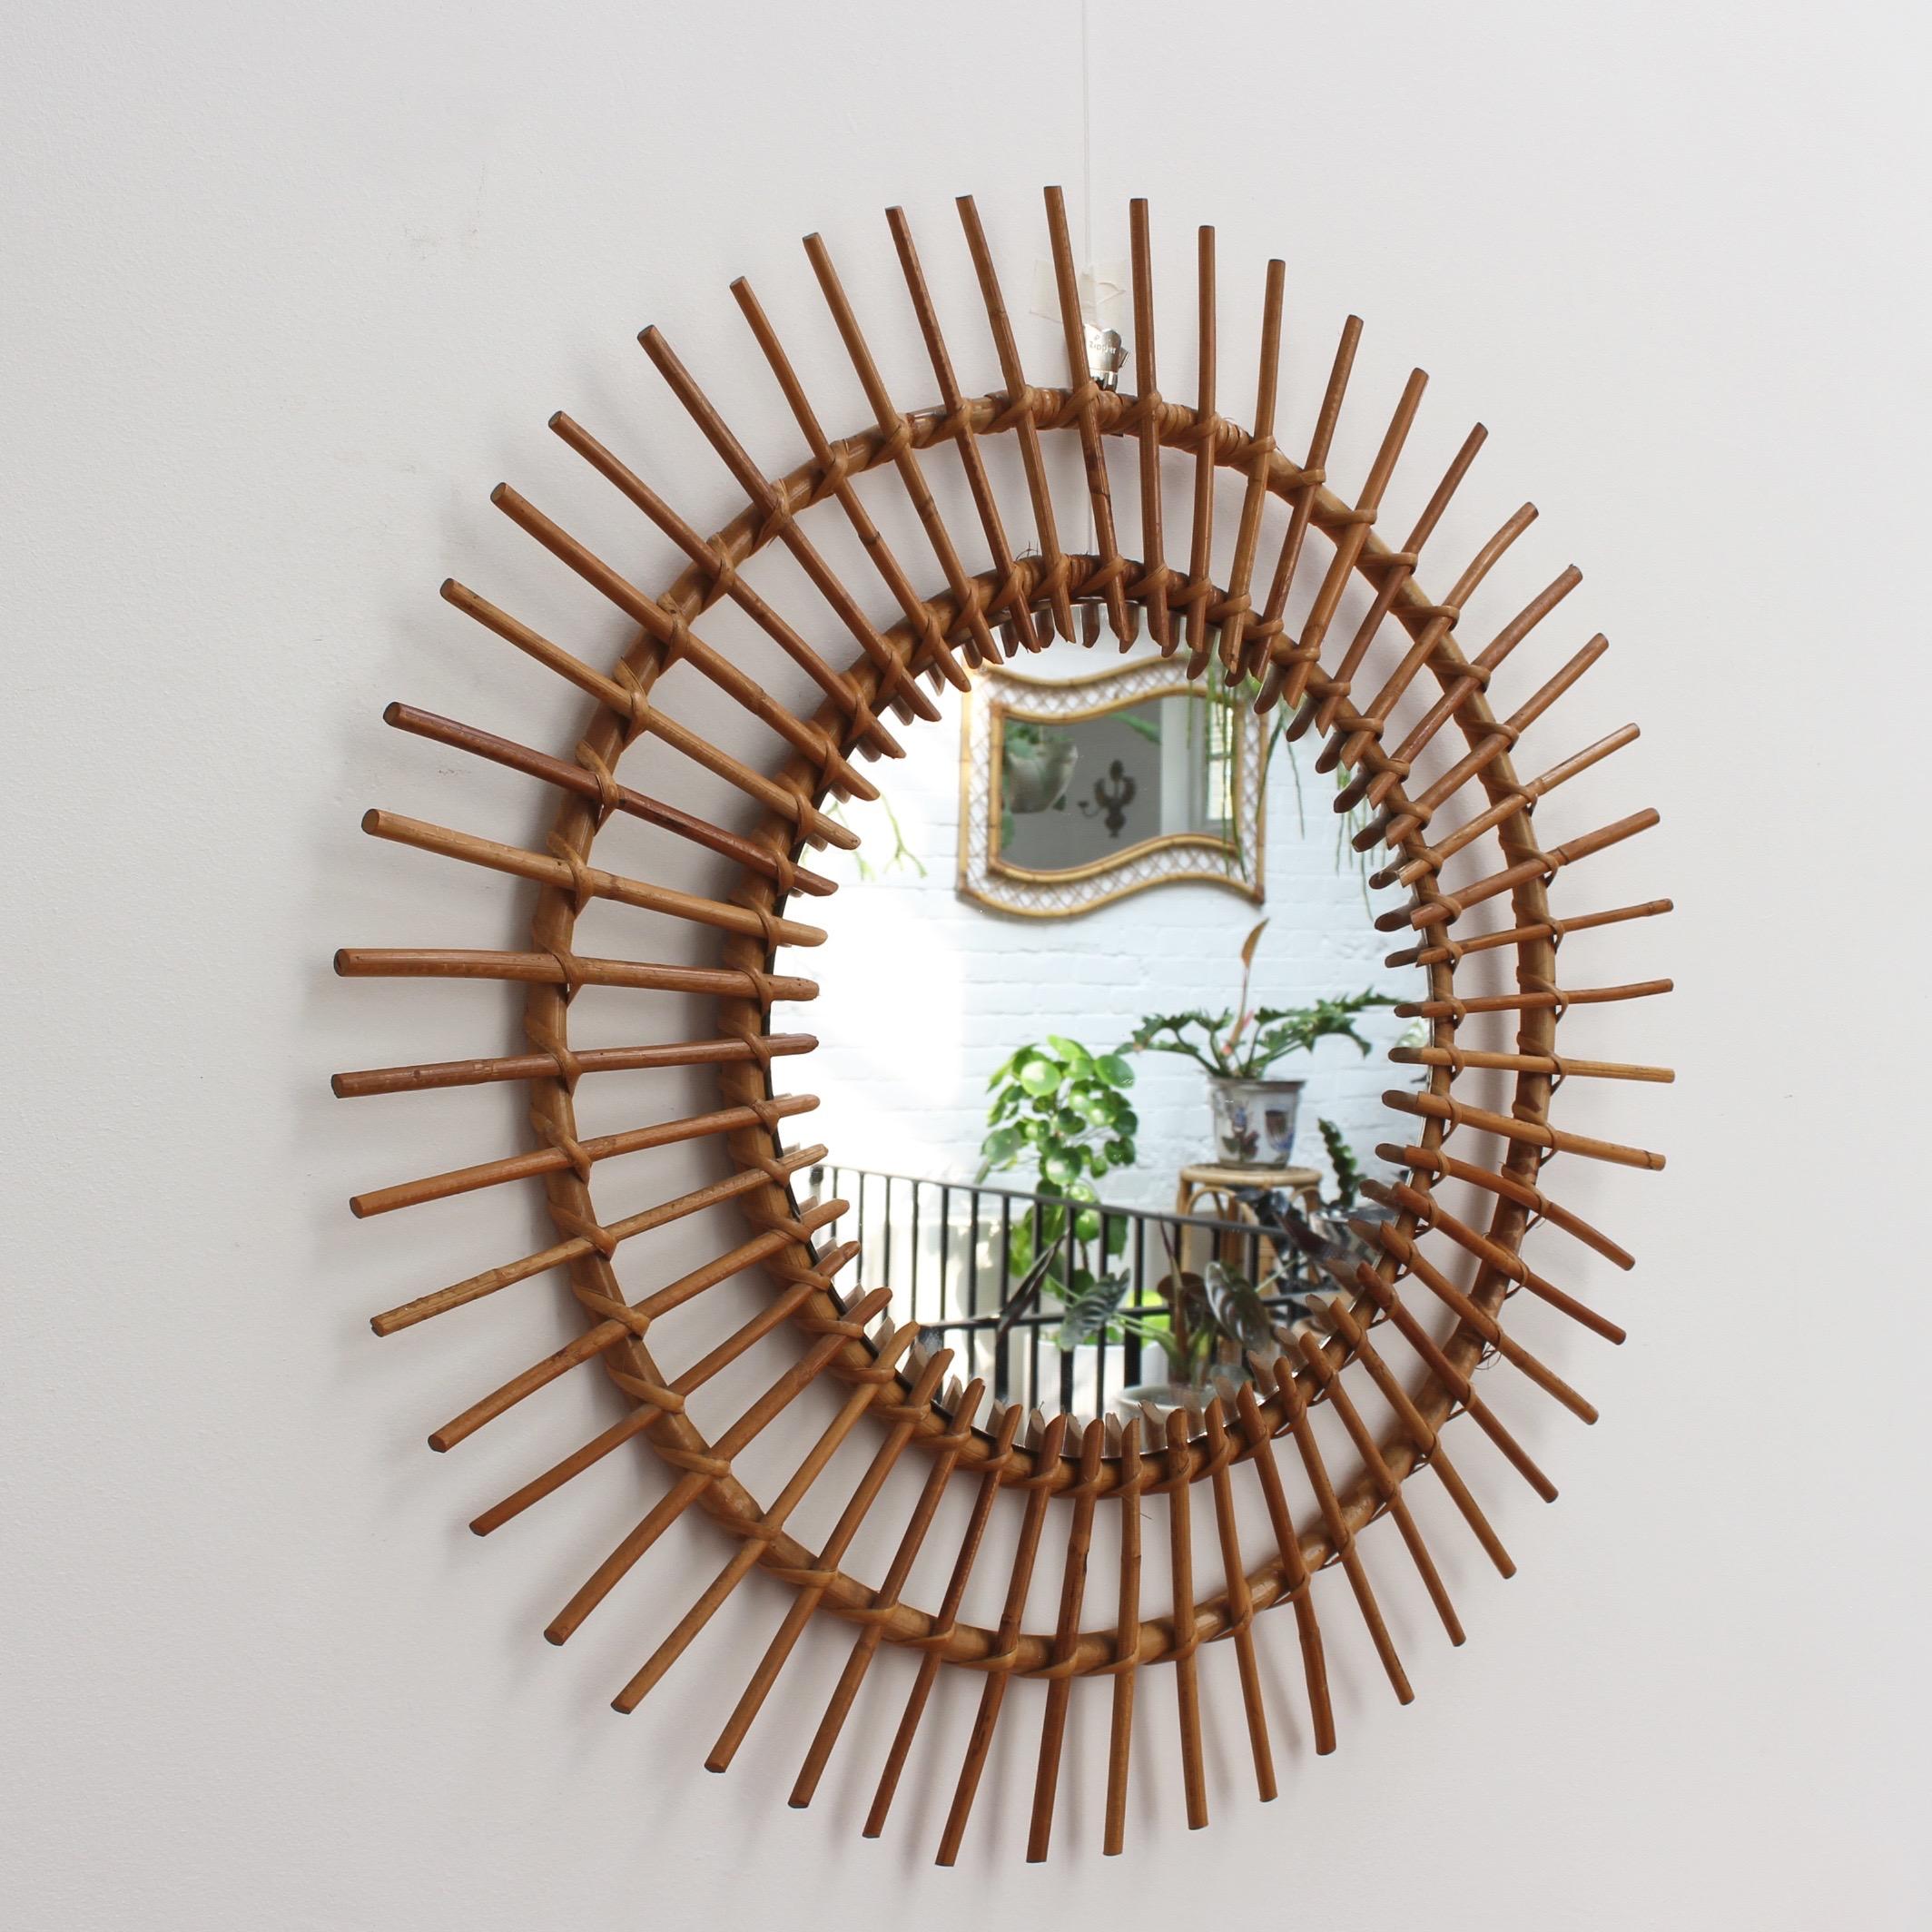 Large midcentury French rattan sunburst mirror (circa 1960s). A vintage collectible classic with sunburst halo and spokes in rattan cane. A designer's favorite, this mirror is in good condition consistent with age and use showing a characterful